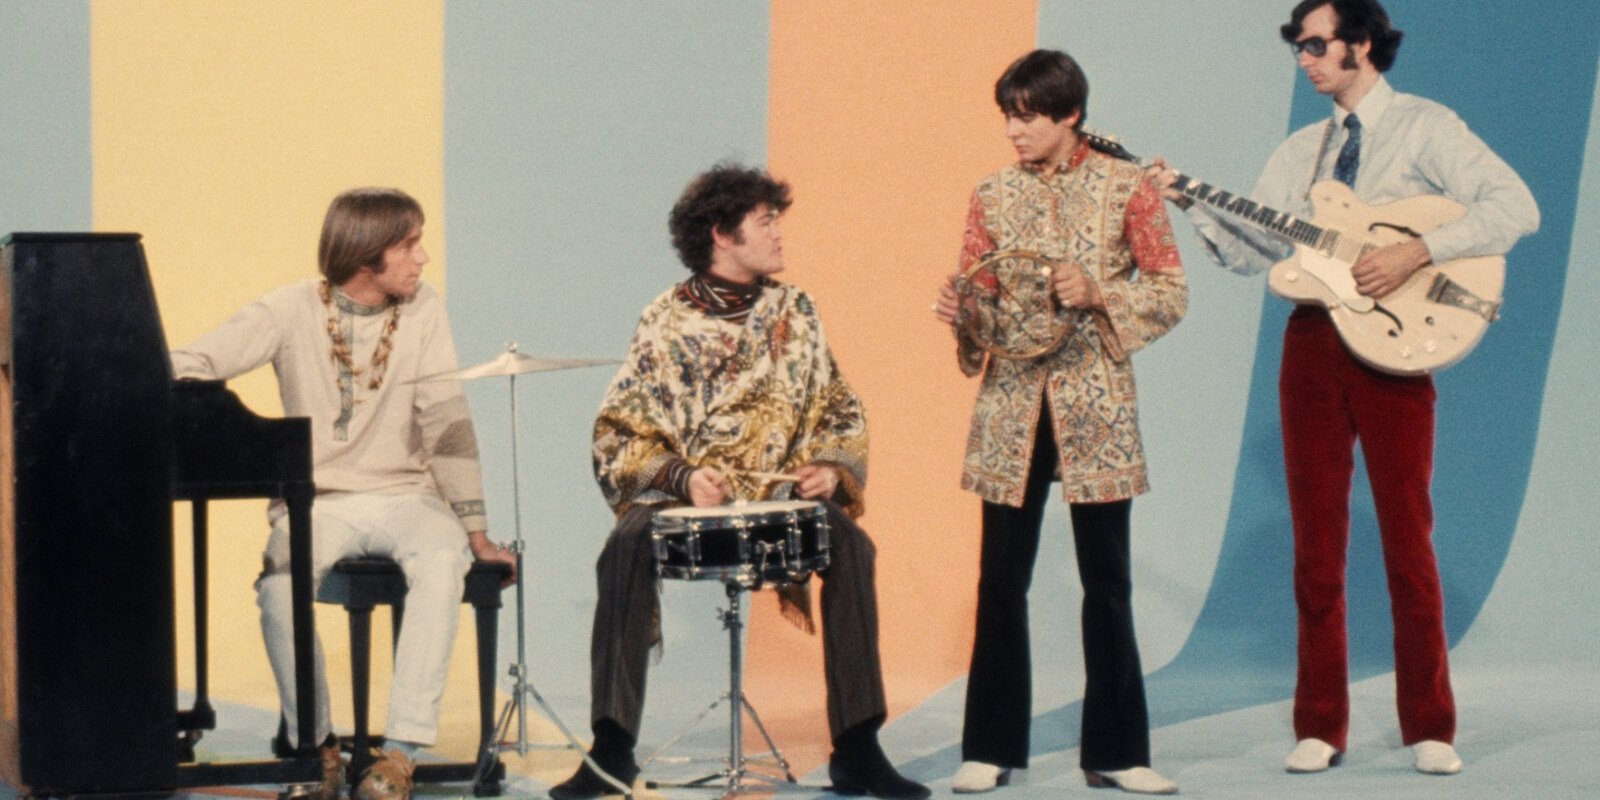 The Monkees perform a song on their eponymous television show.